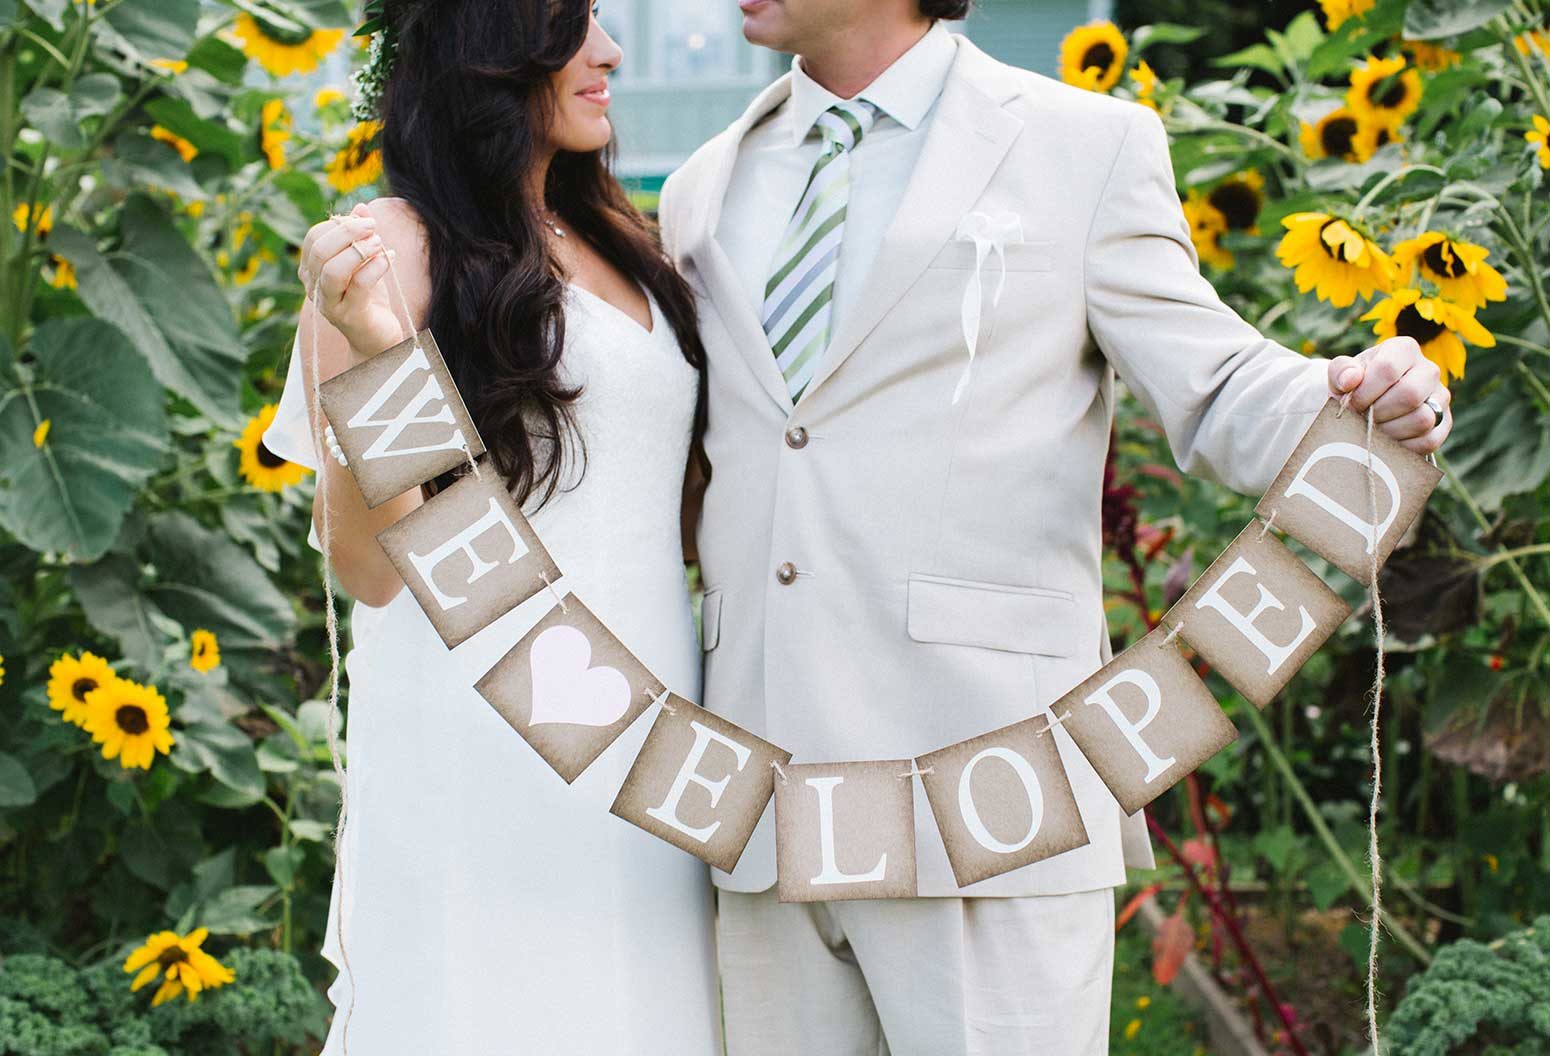 Couple holding "We Eloped" banner